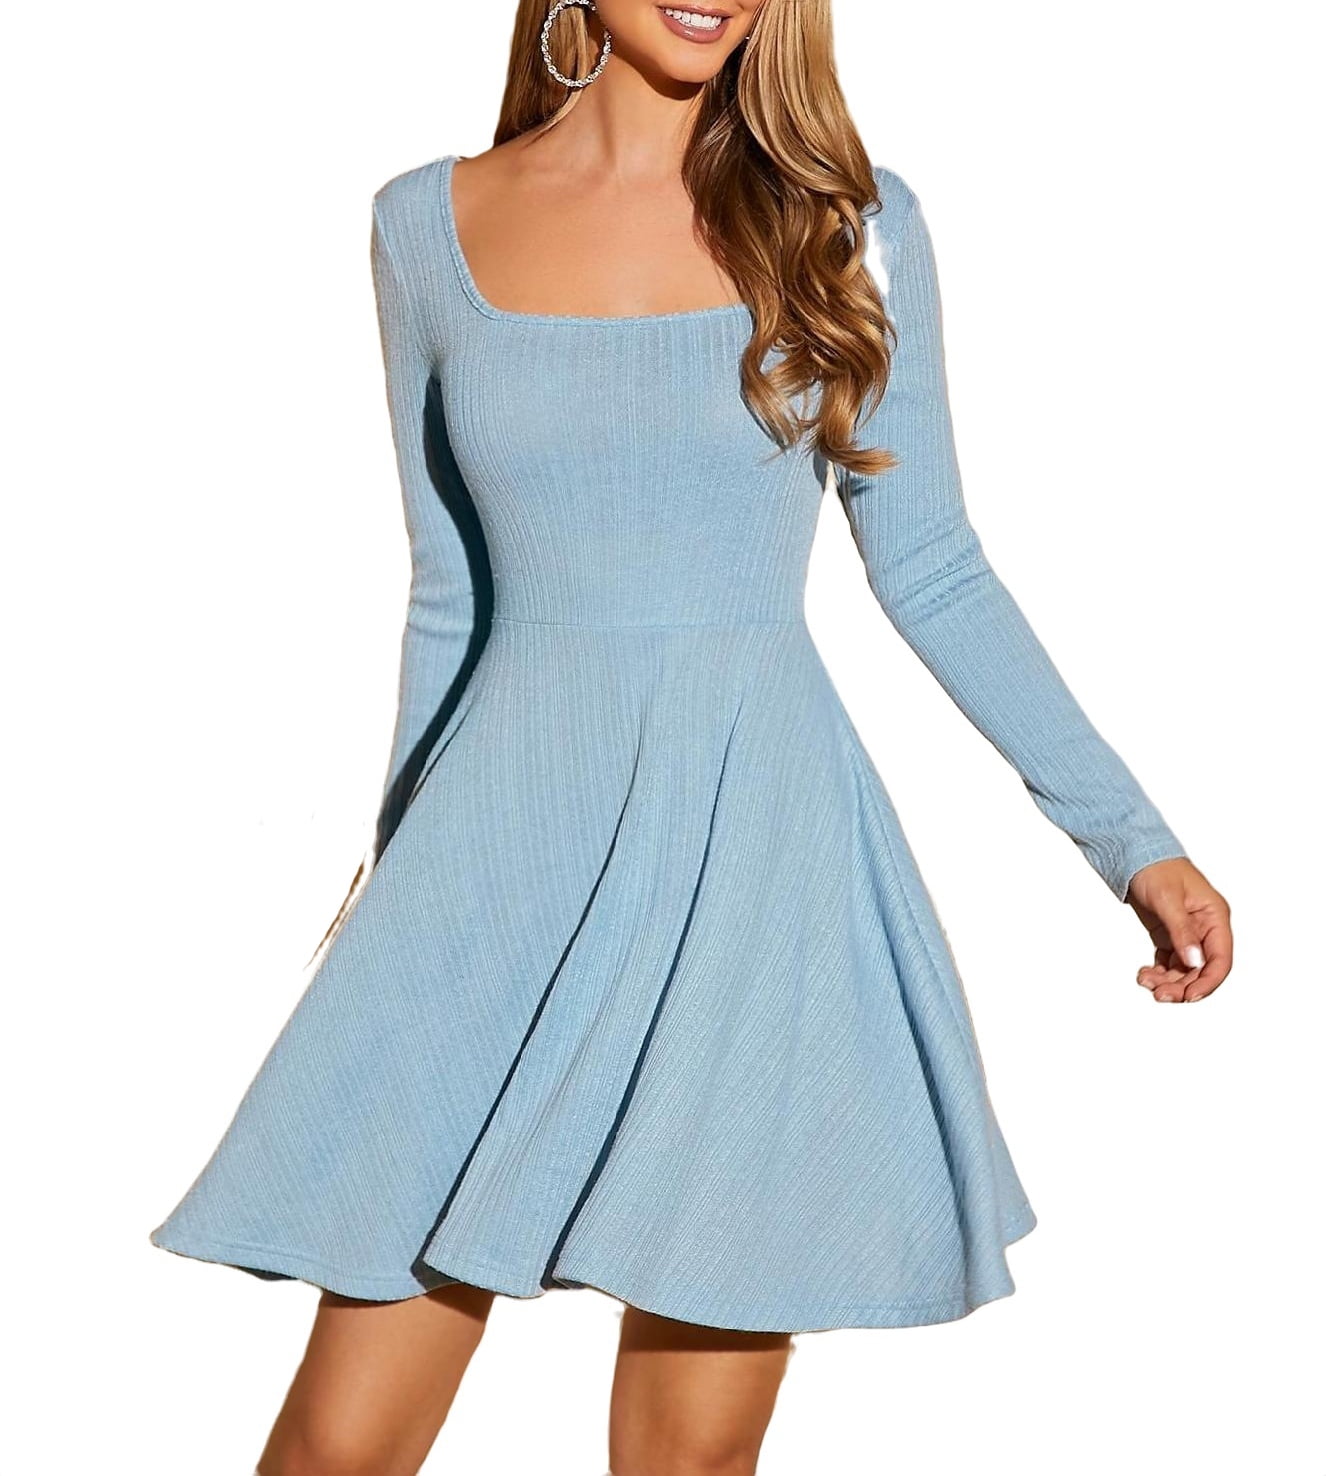 Elegant Solid Square Neck Fit and Flare Dress Long Sleeve Baby Blue  (Women's Dresses)